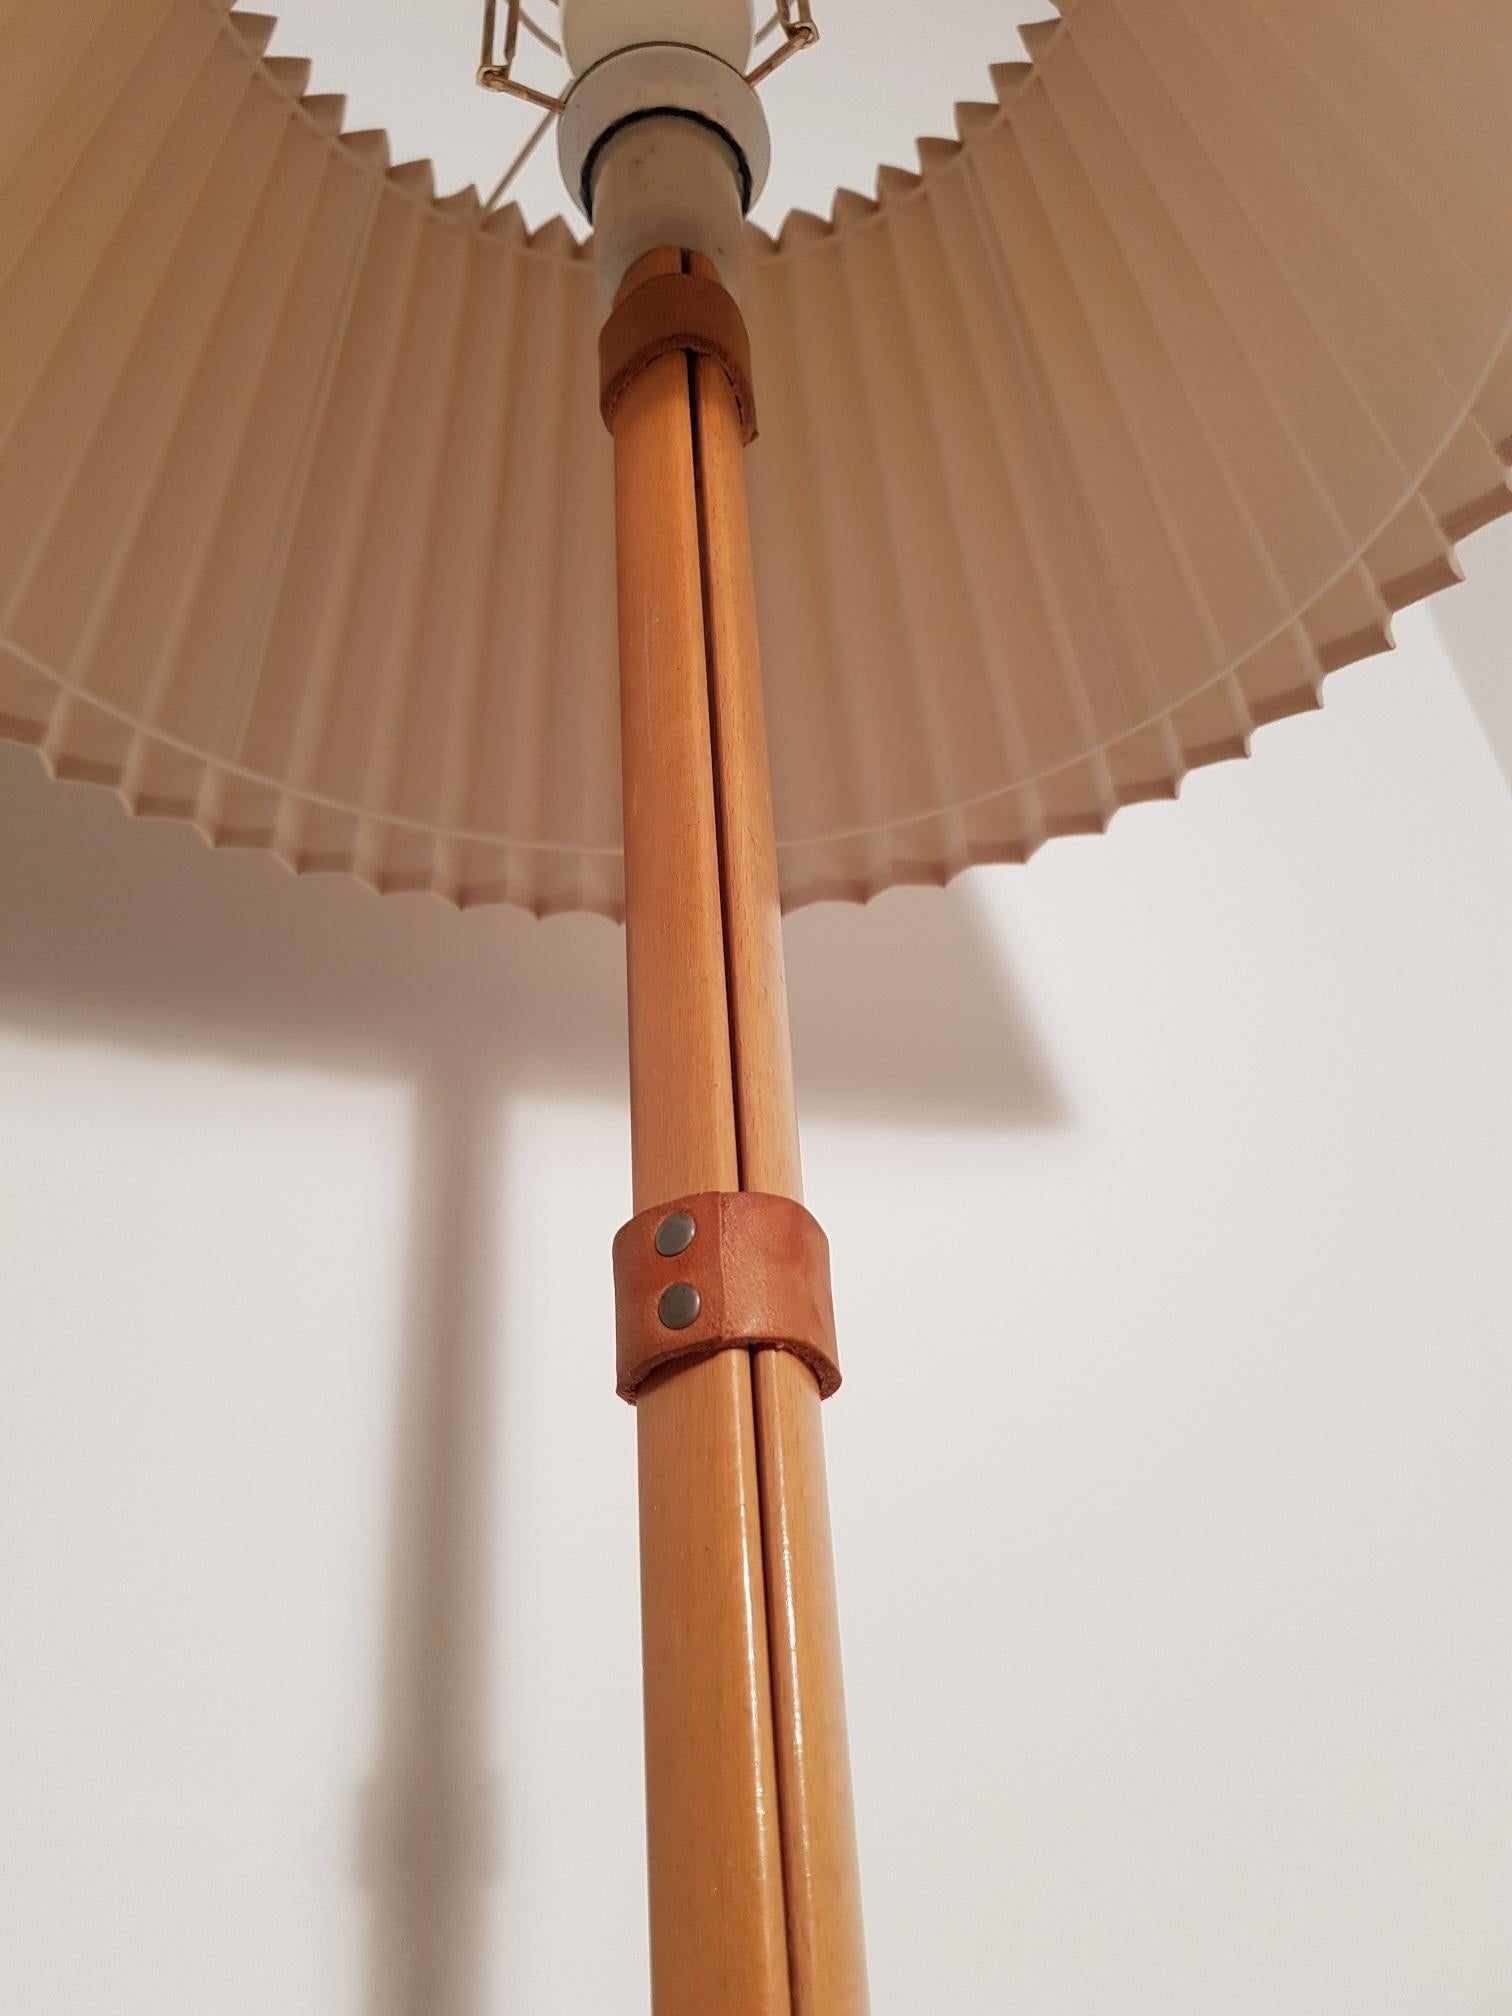 Mid-20th Century Vintage 1950s Swedish Floor Lamp by Alf Svensson Produced by Bergboms, Sweden For Sale